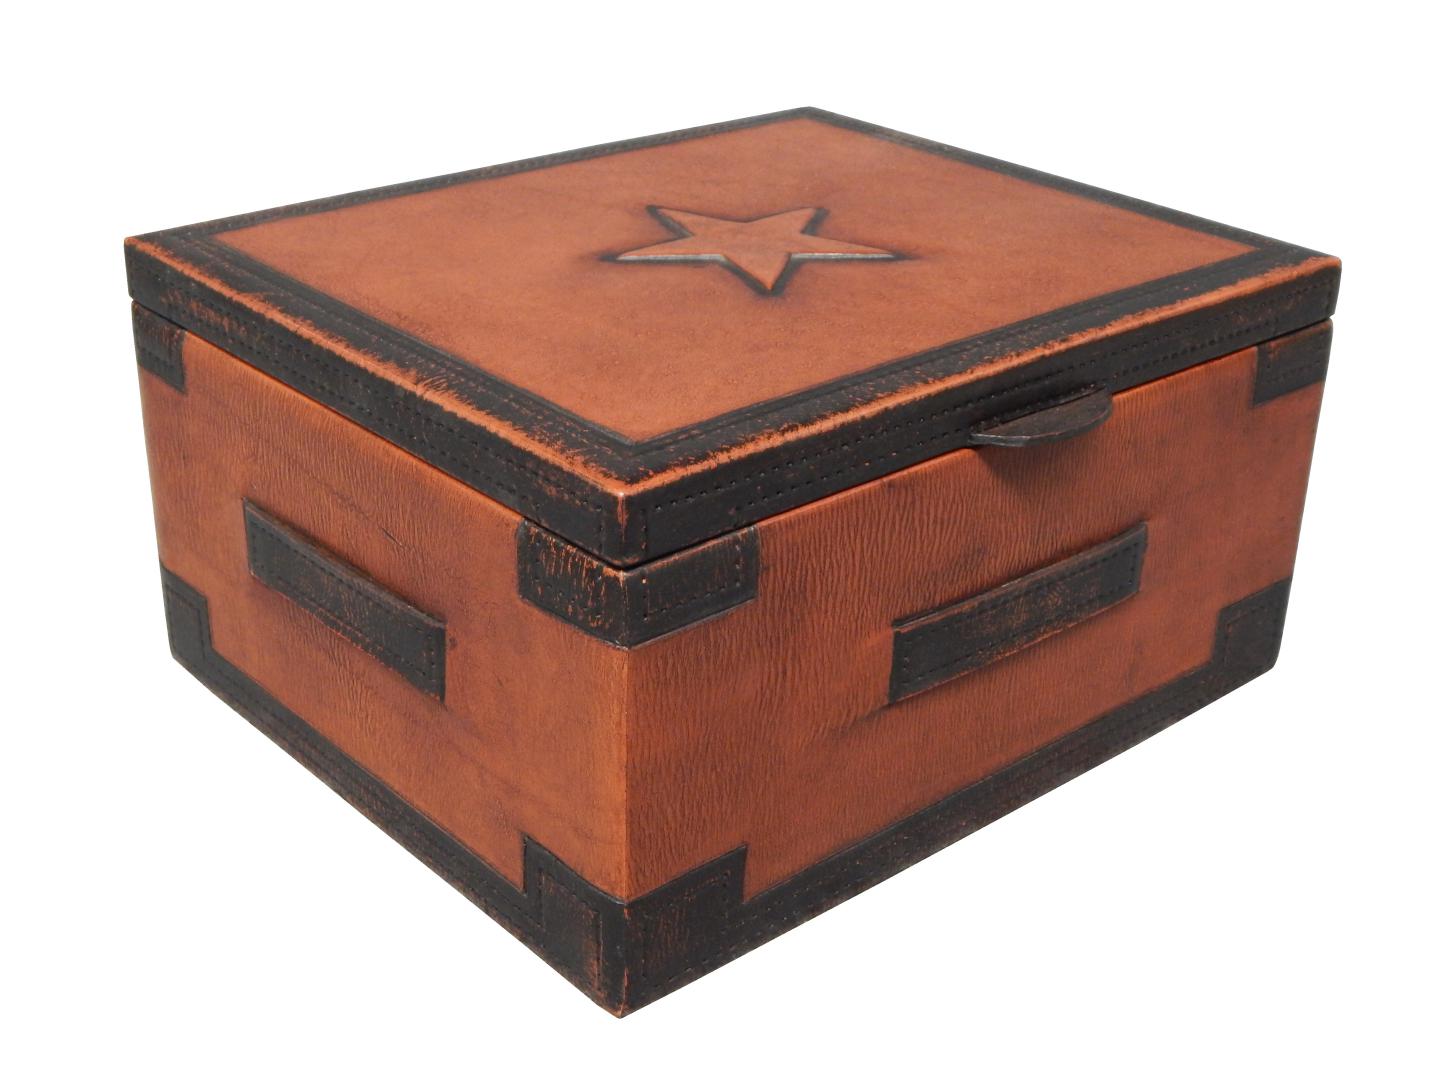 leather box with belts on the sides and high relief star top